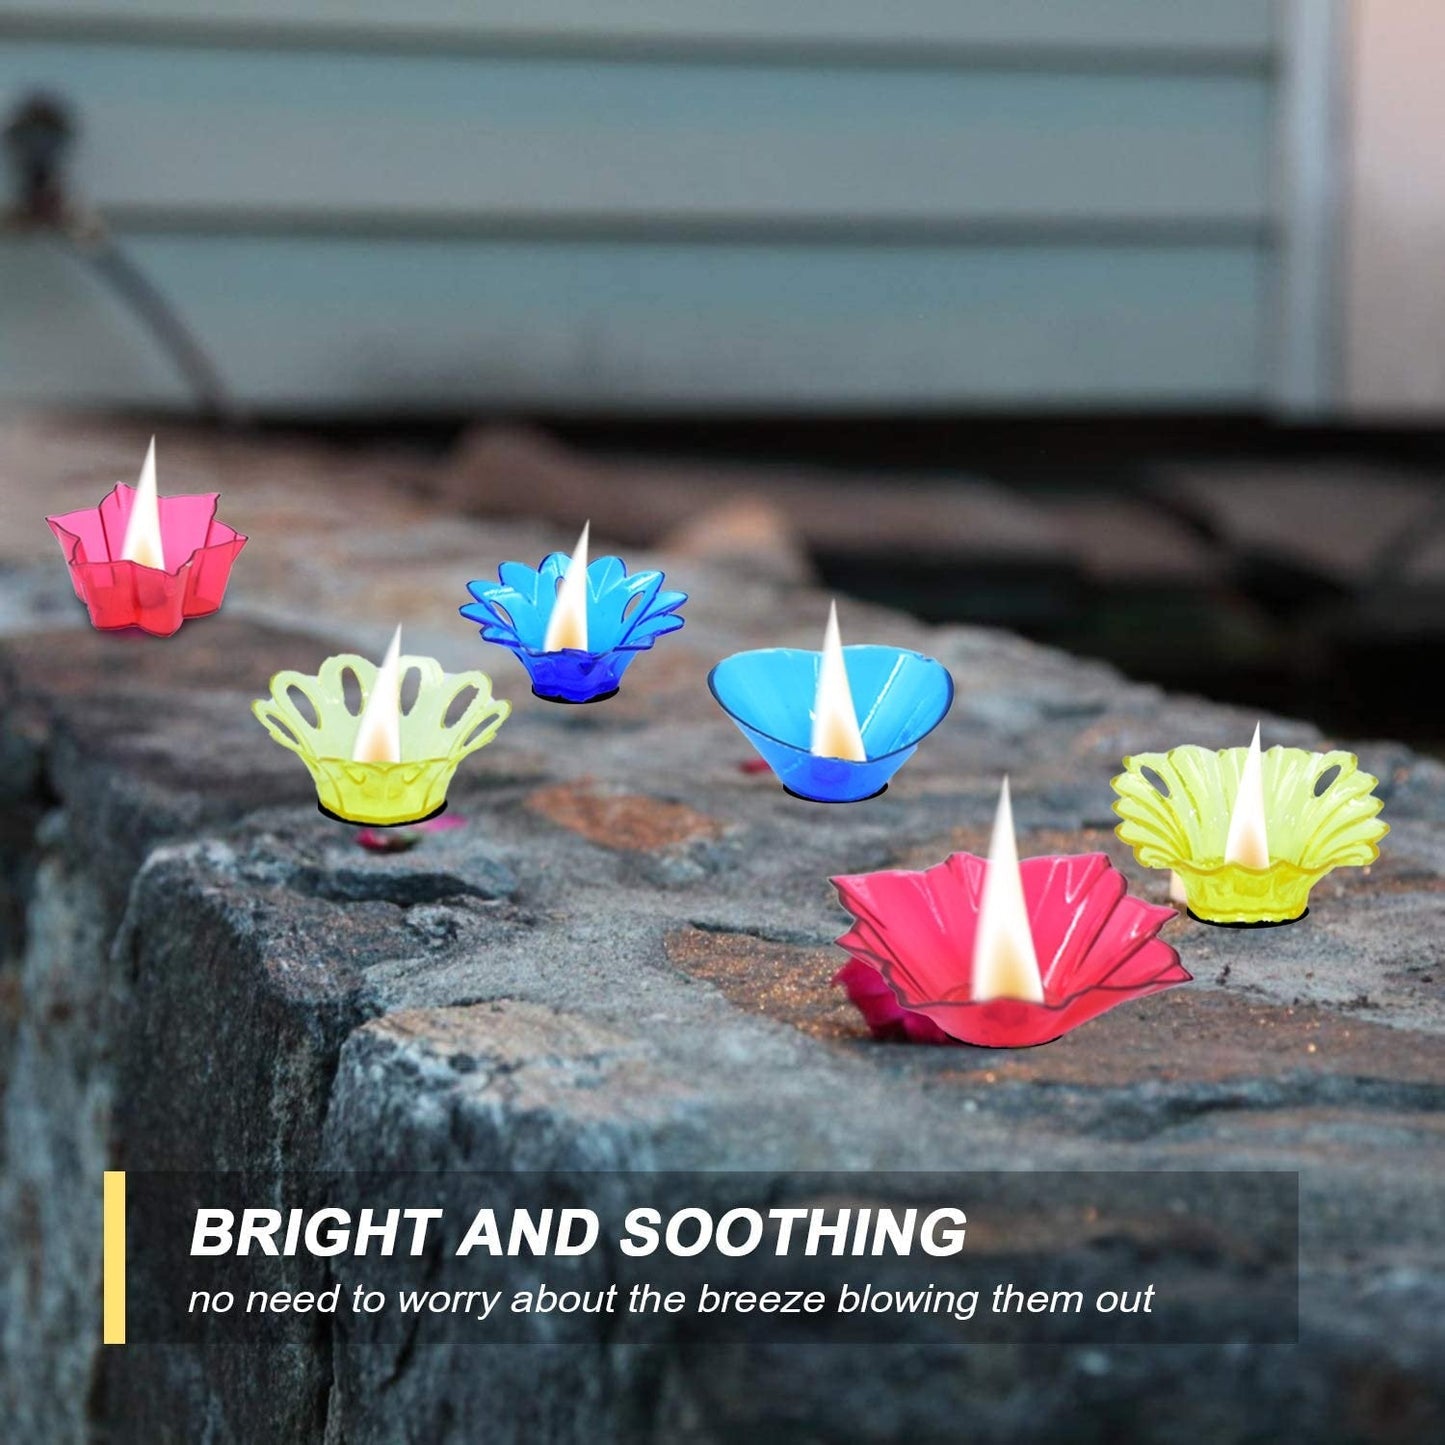 Plastic Candle Cup with Multi Shape Diwali Diya Cup (Multicolor)